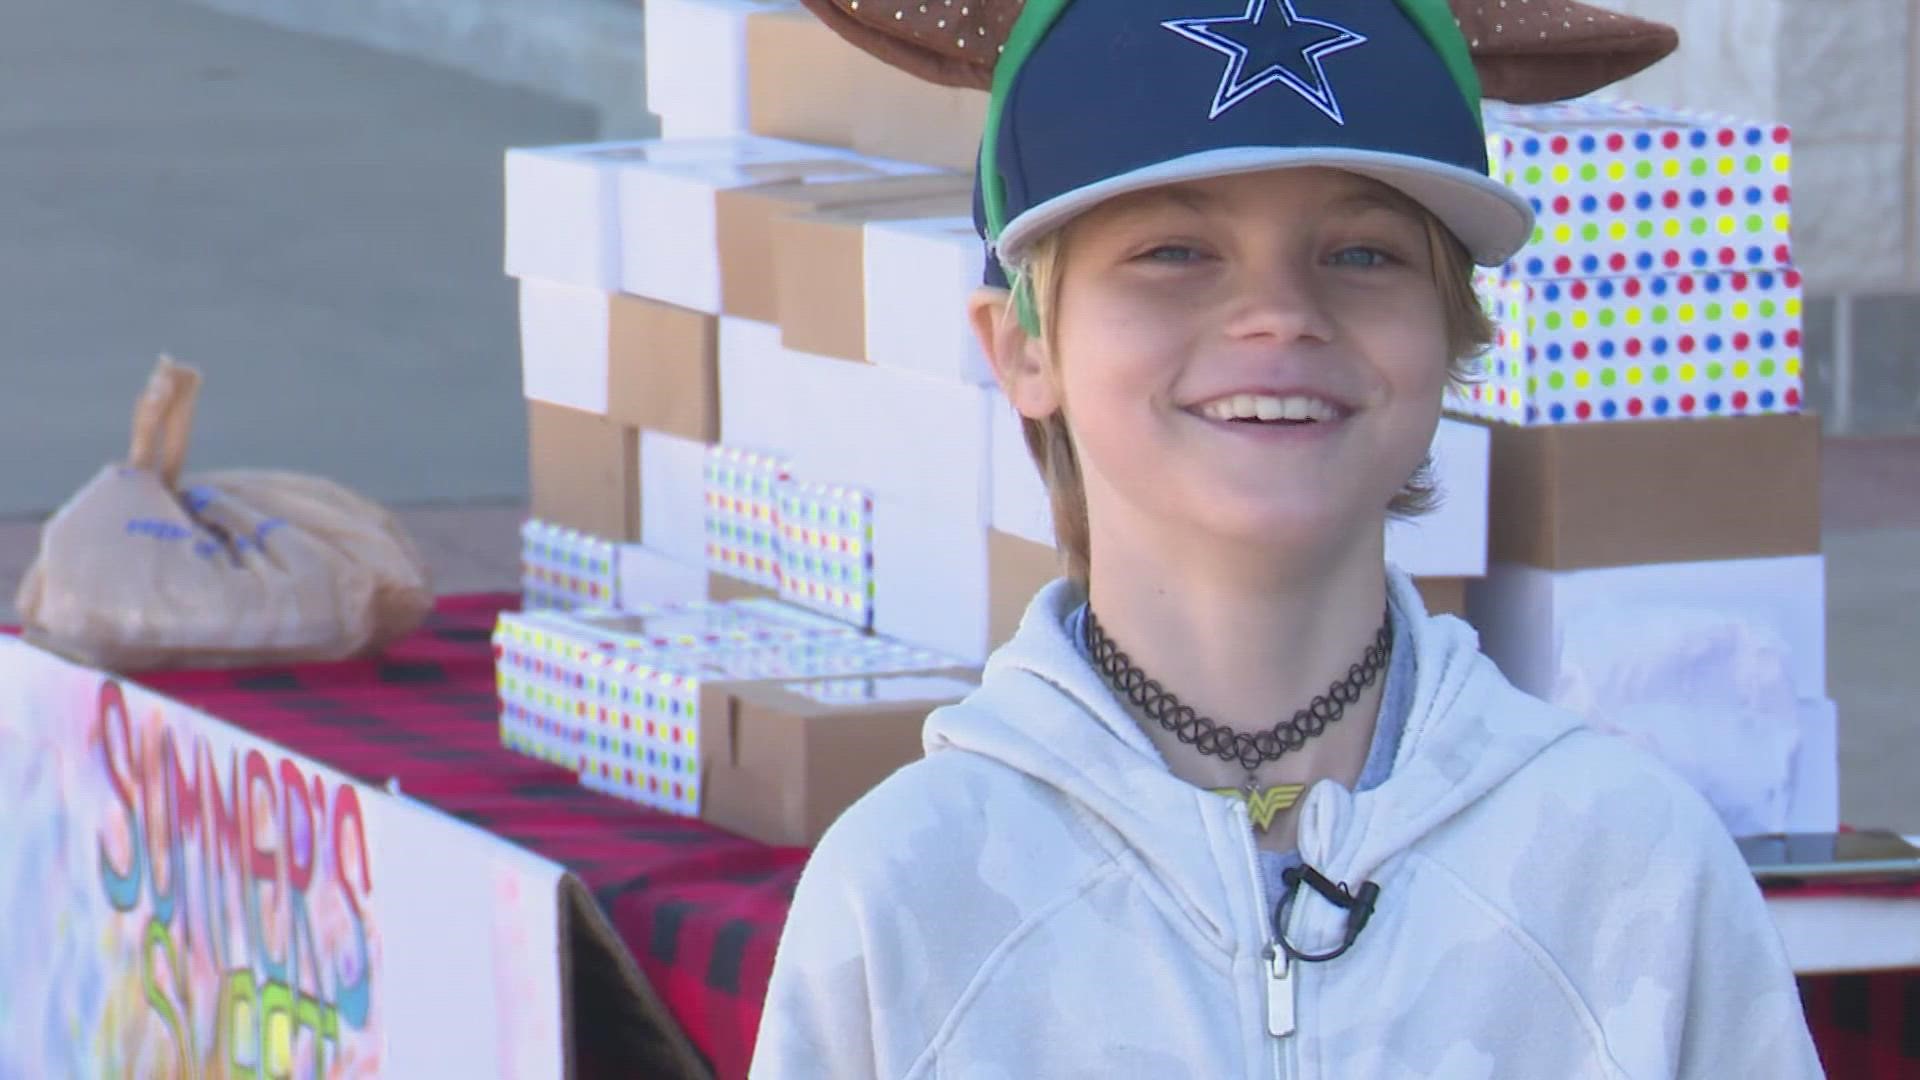 A young Pearland student is stepping up to help foster kids in a big way. Summer Linn, 8, is turning cupcakes into Christmas gifts and has already adopted 13 kids.